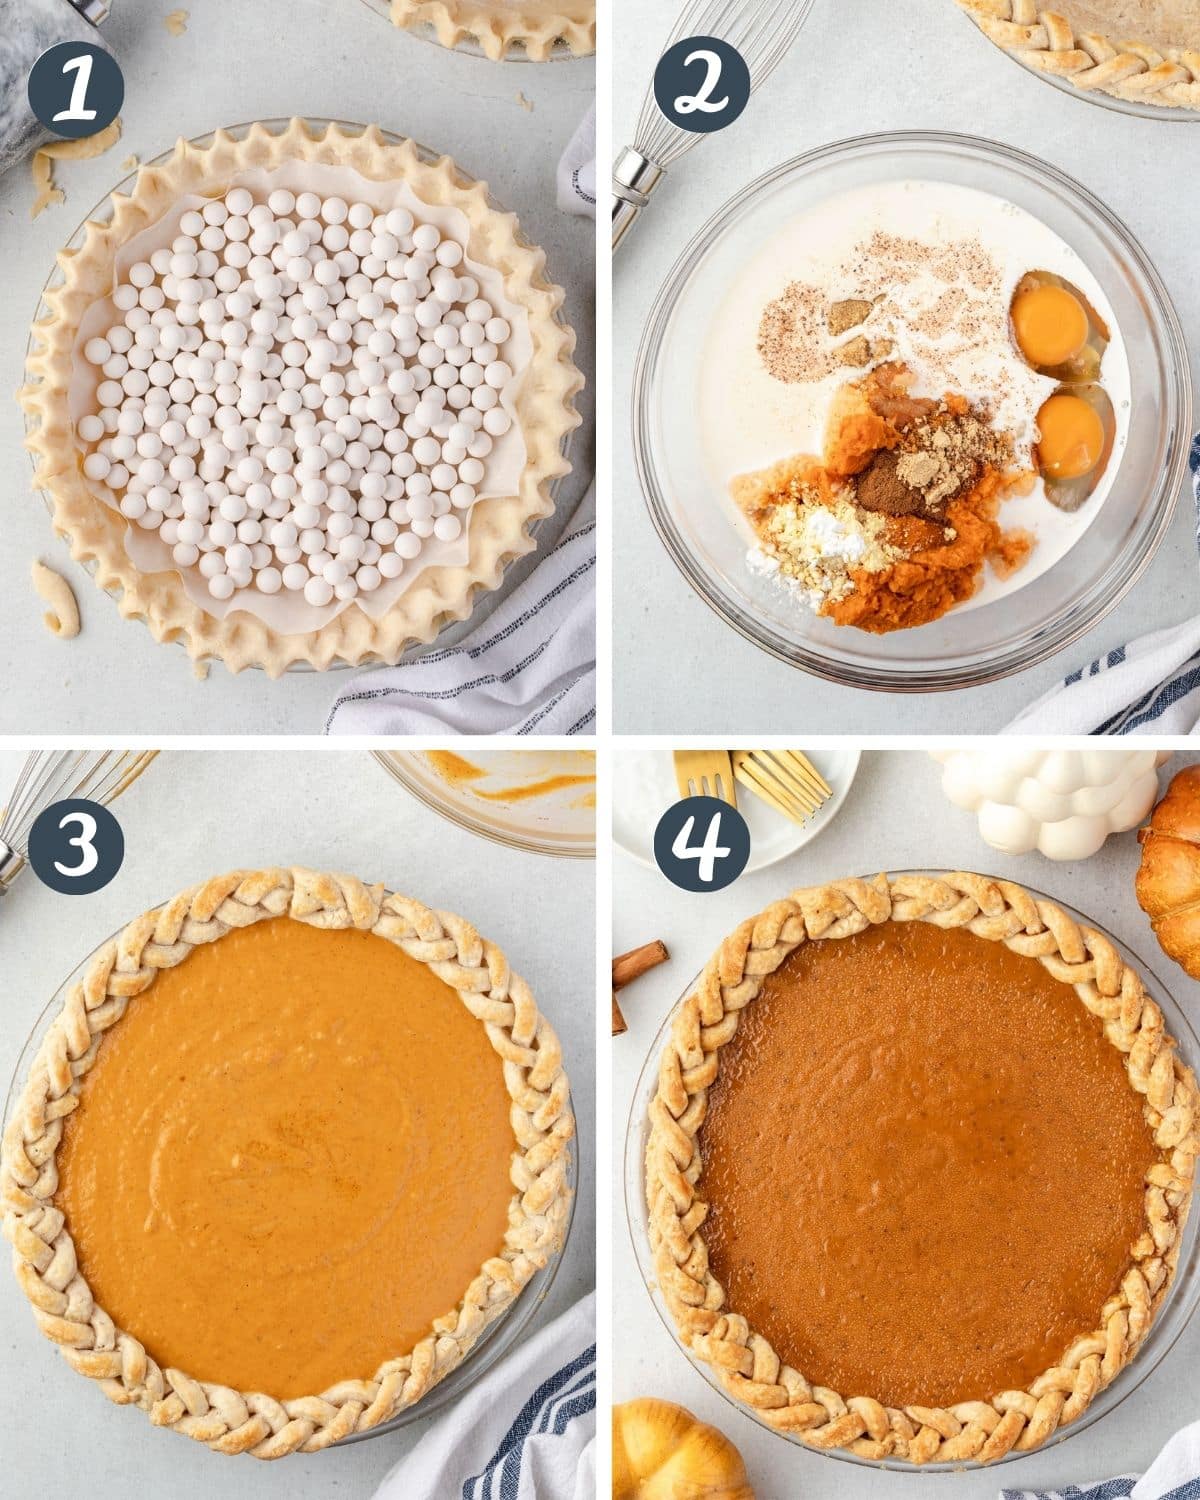 Pictures of the 4 steps for making pumpkin pie.